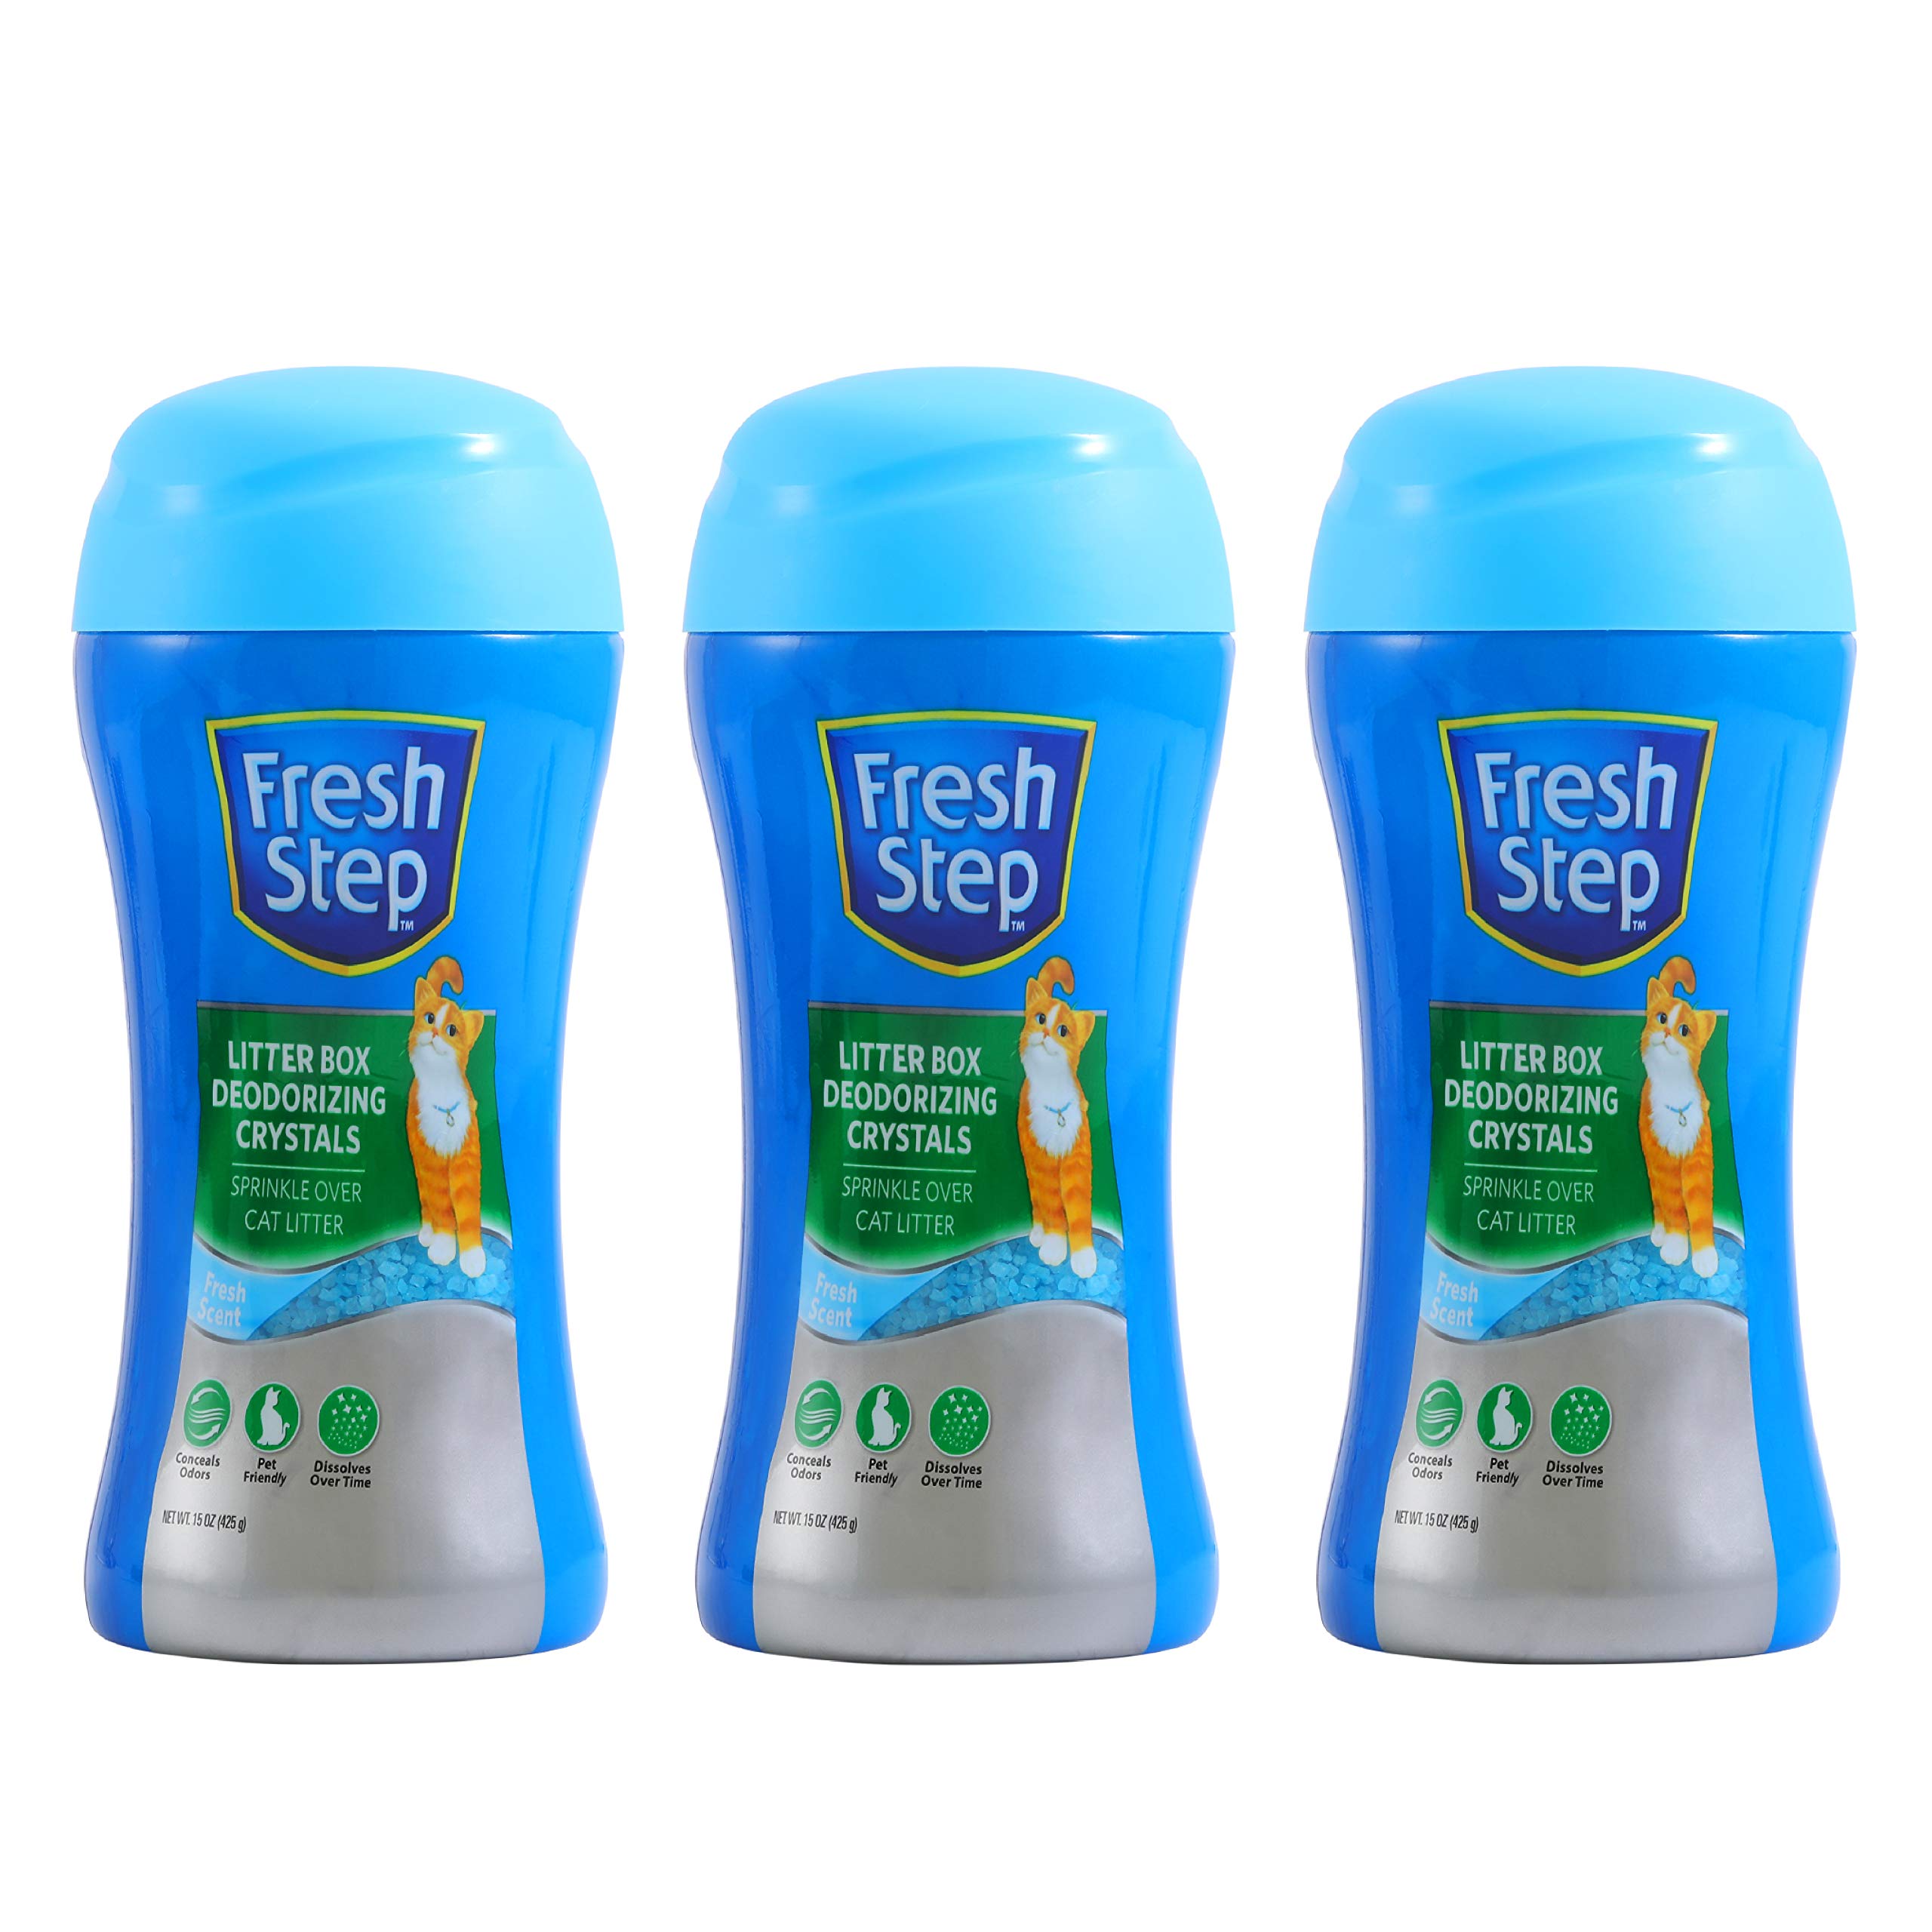 Fresh Step Cat Litter Crystals In Fresh Scent